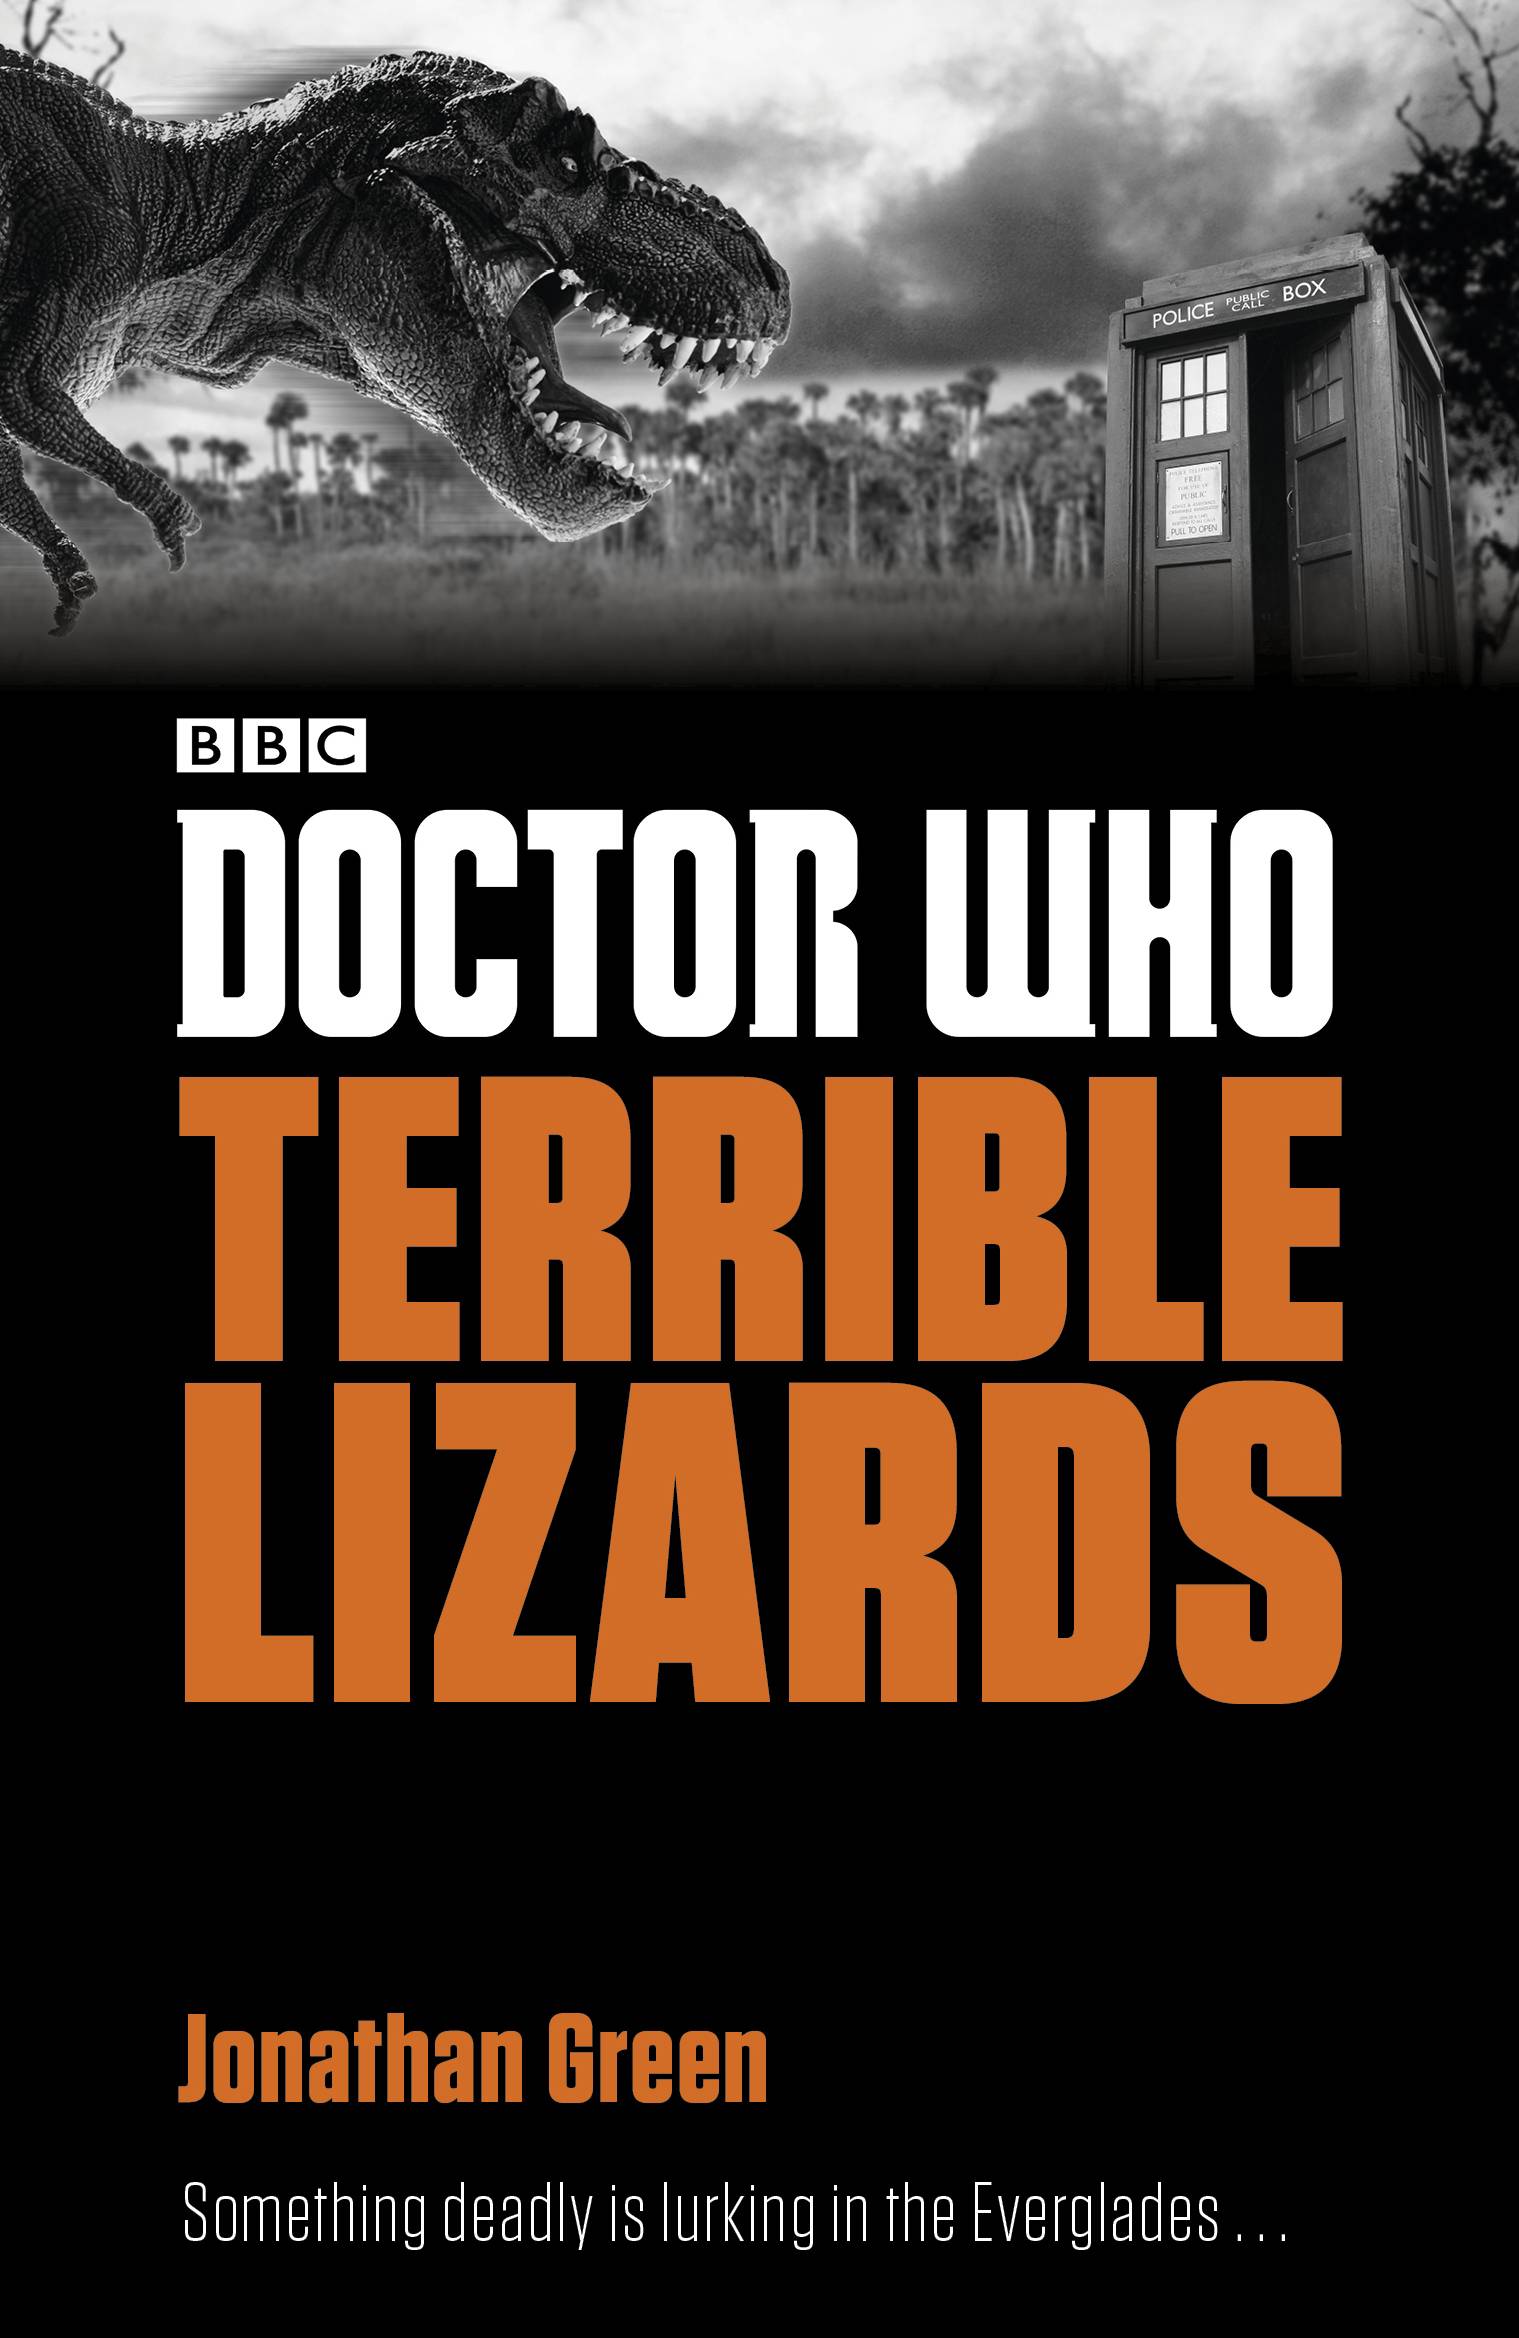 Doctor Who Terrible Lizards Soft Cover